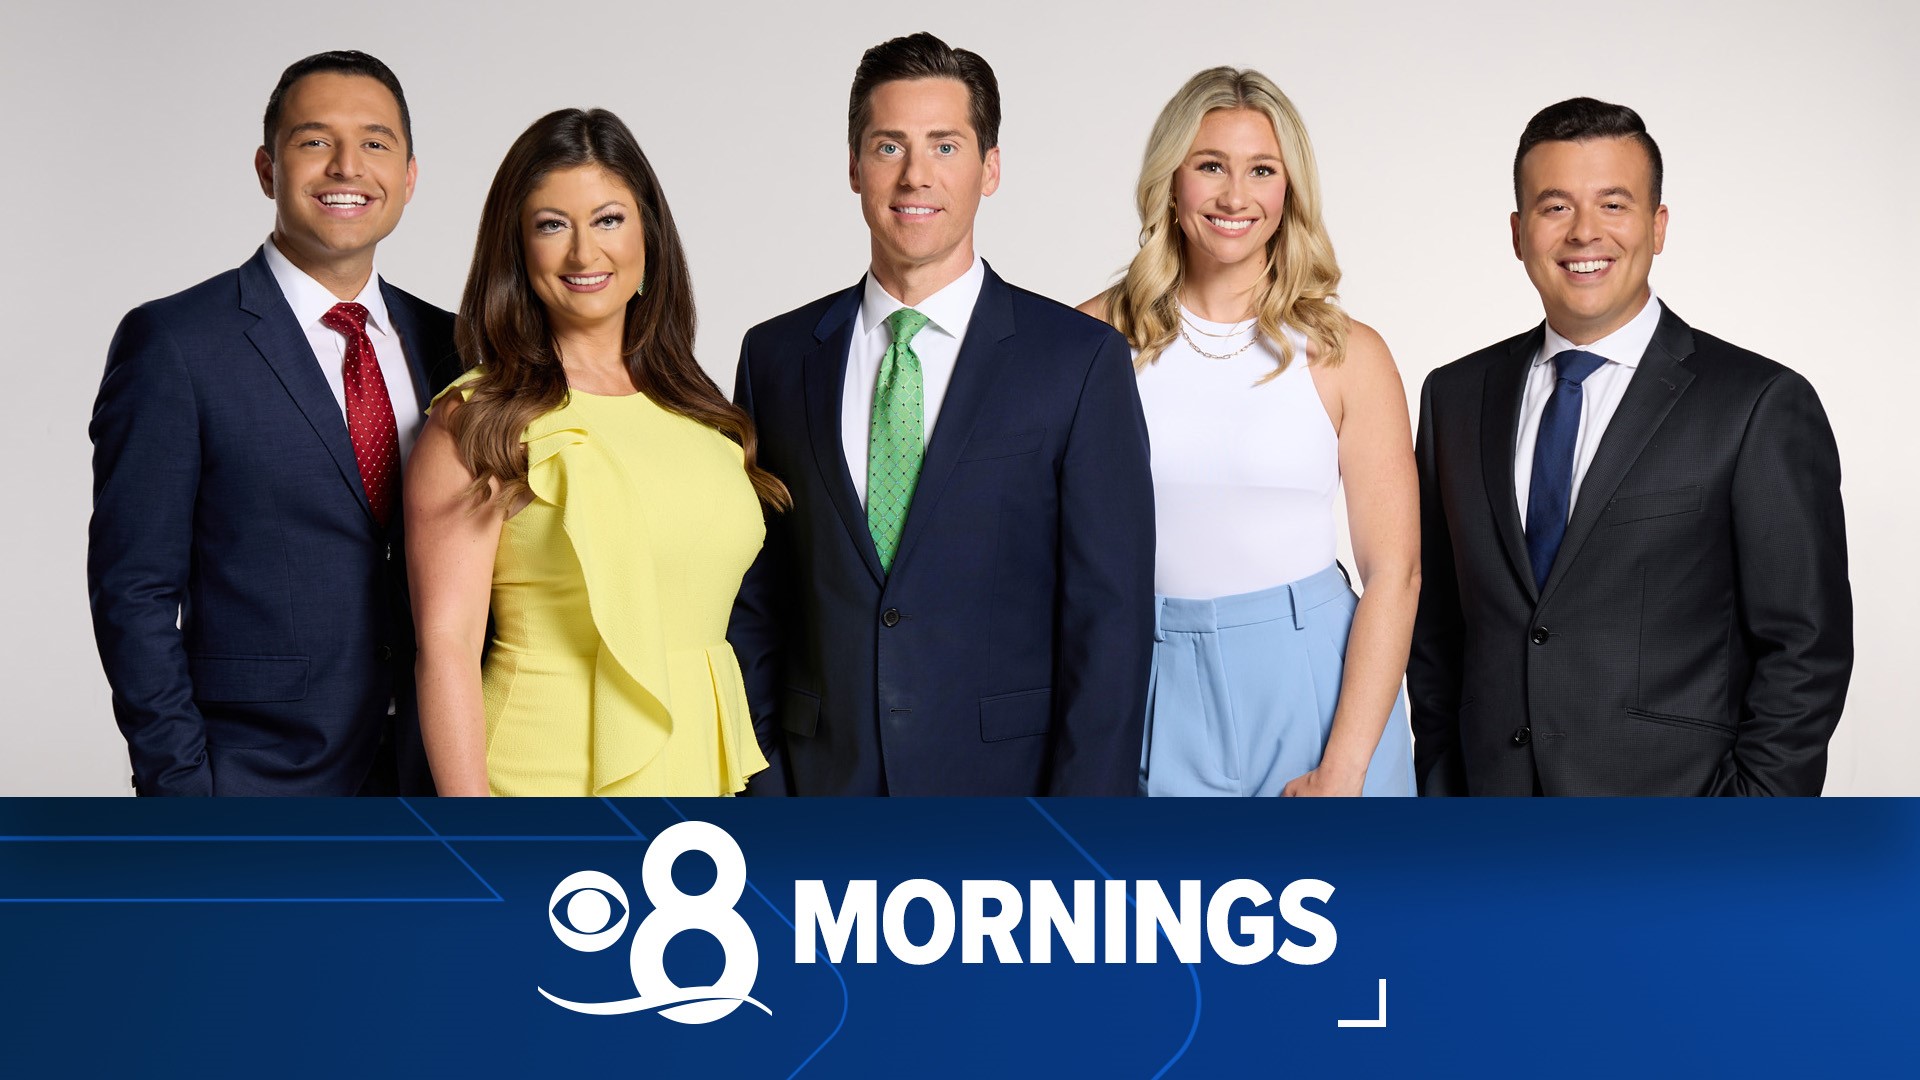 CBS 8 Mornings will help get your day started with not only what happened overnight, but what you can expect in the day ahead.